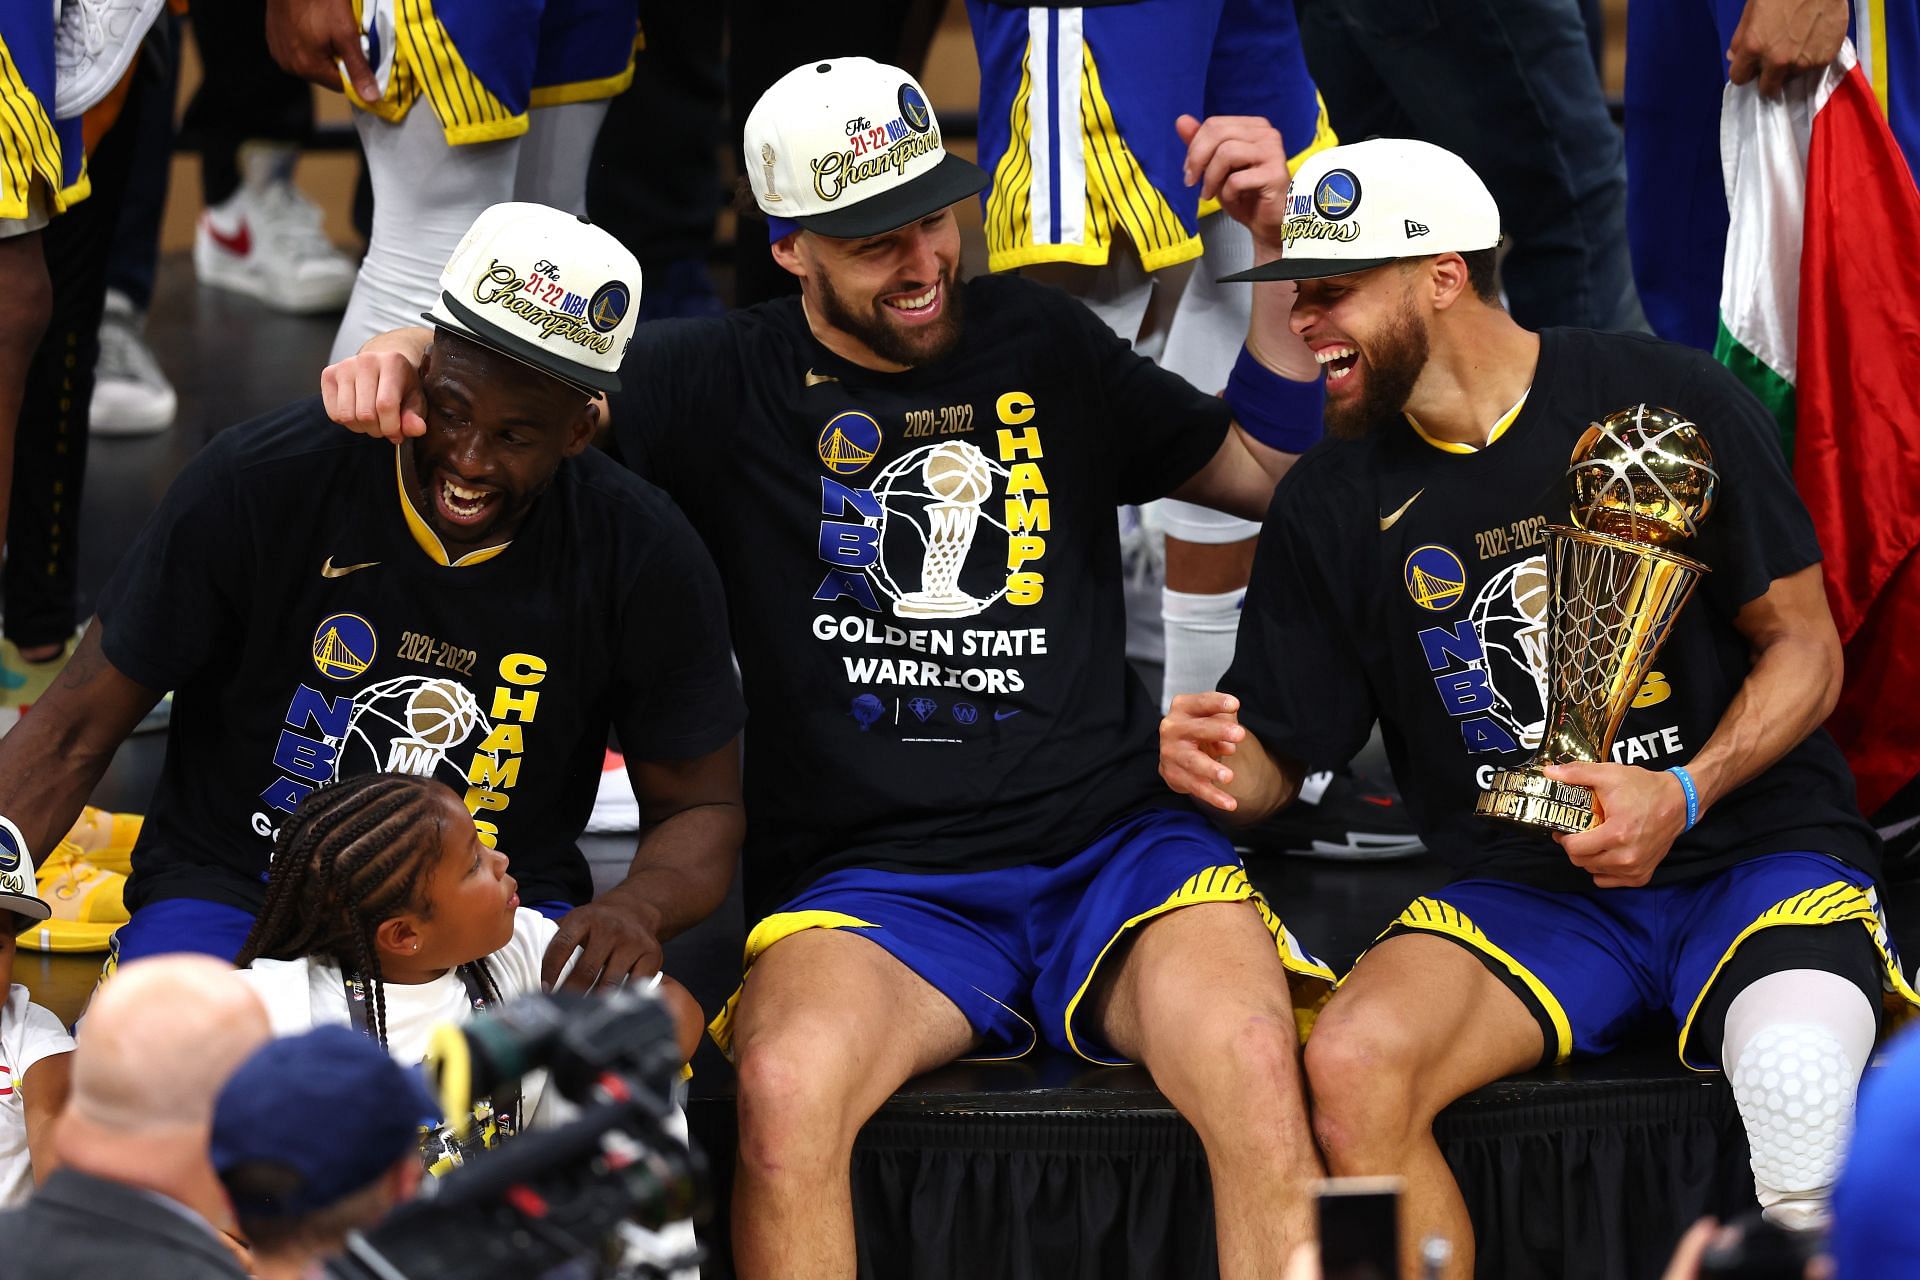 Draymond Green, Klay Thompson and Steph Curry of the Golden State Warriors